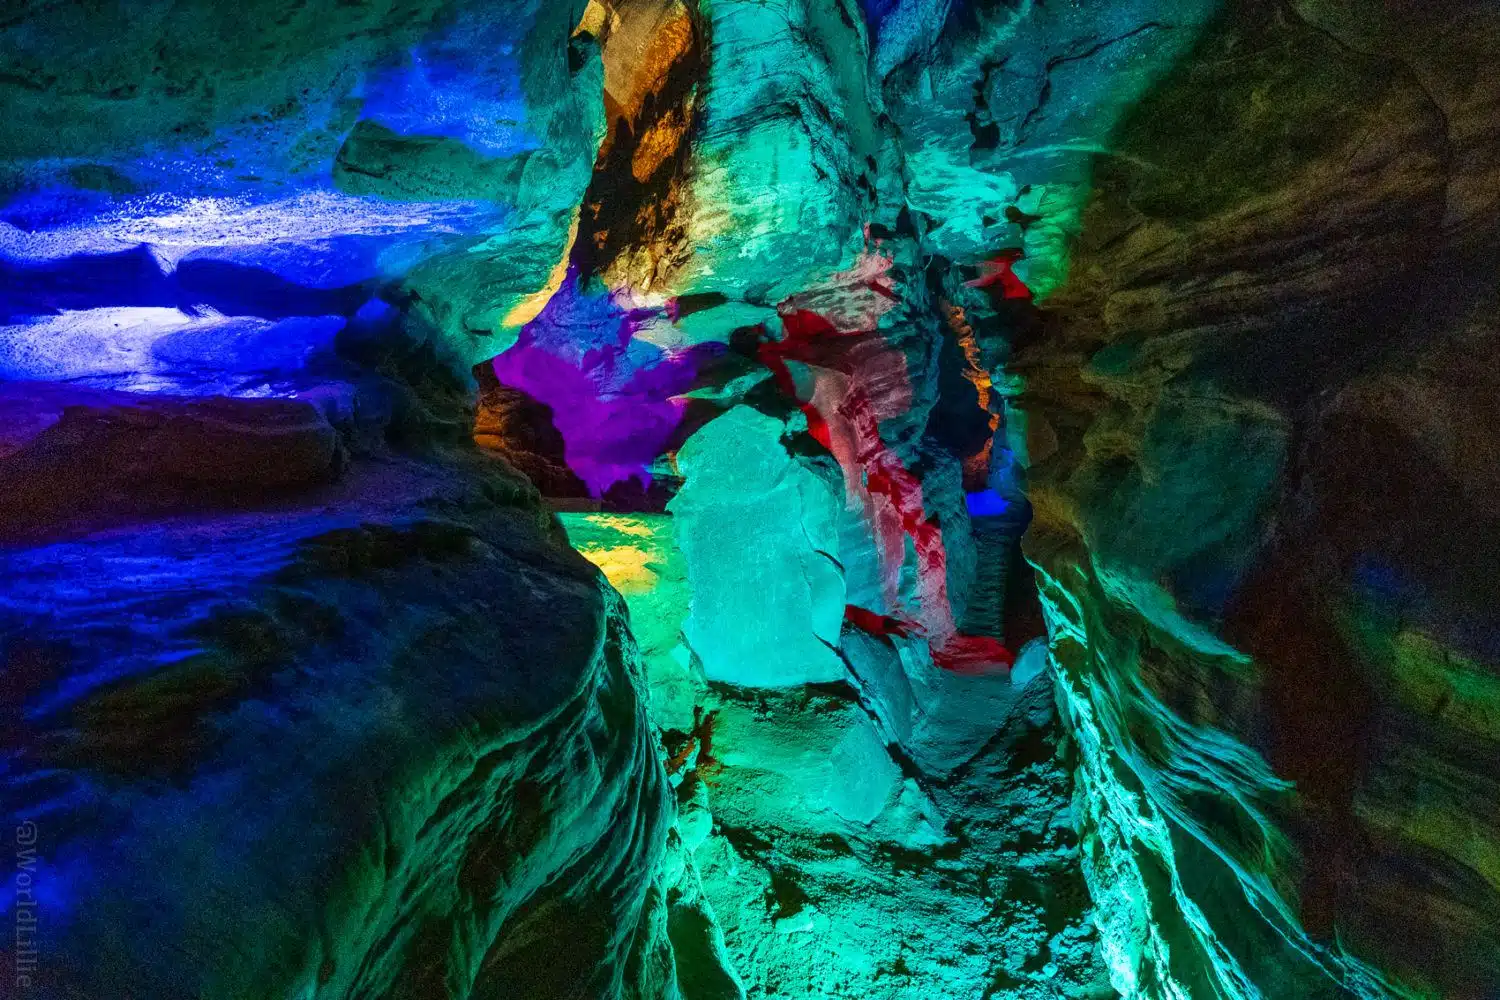 I love that teal light on the rock of the cavern walls.